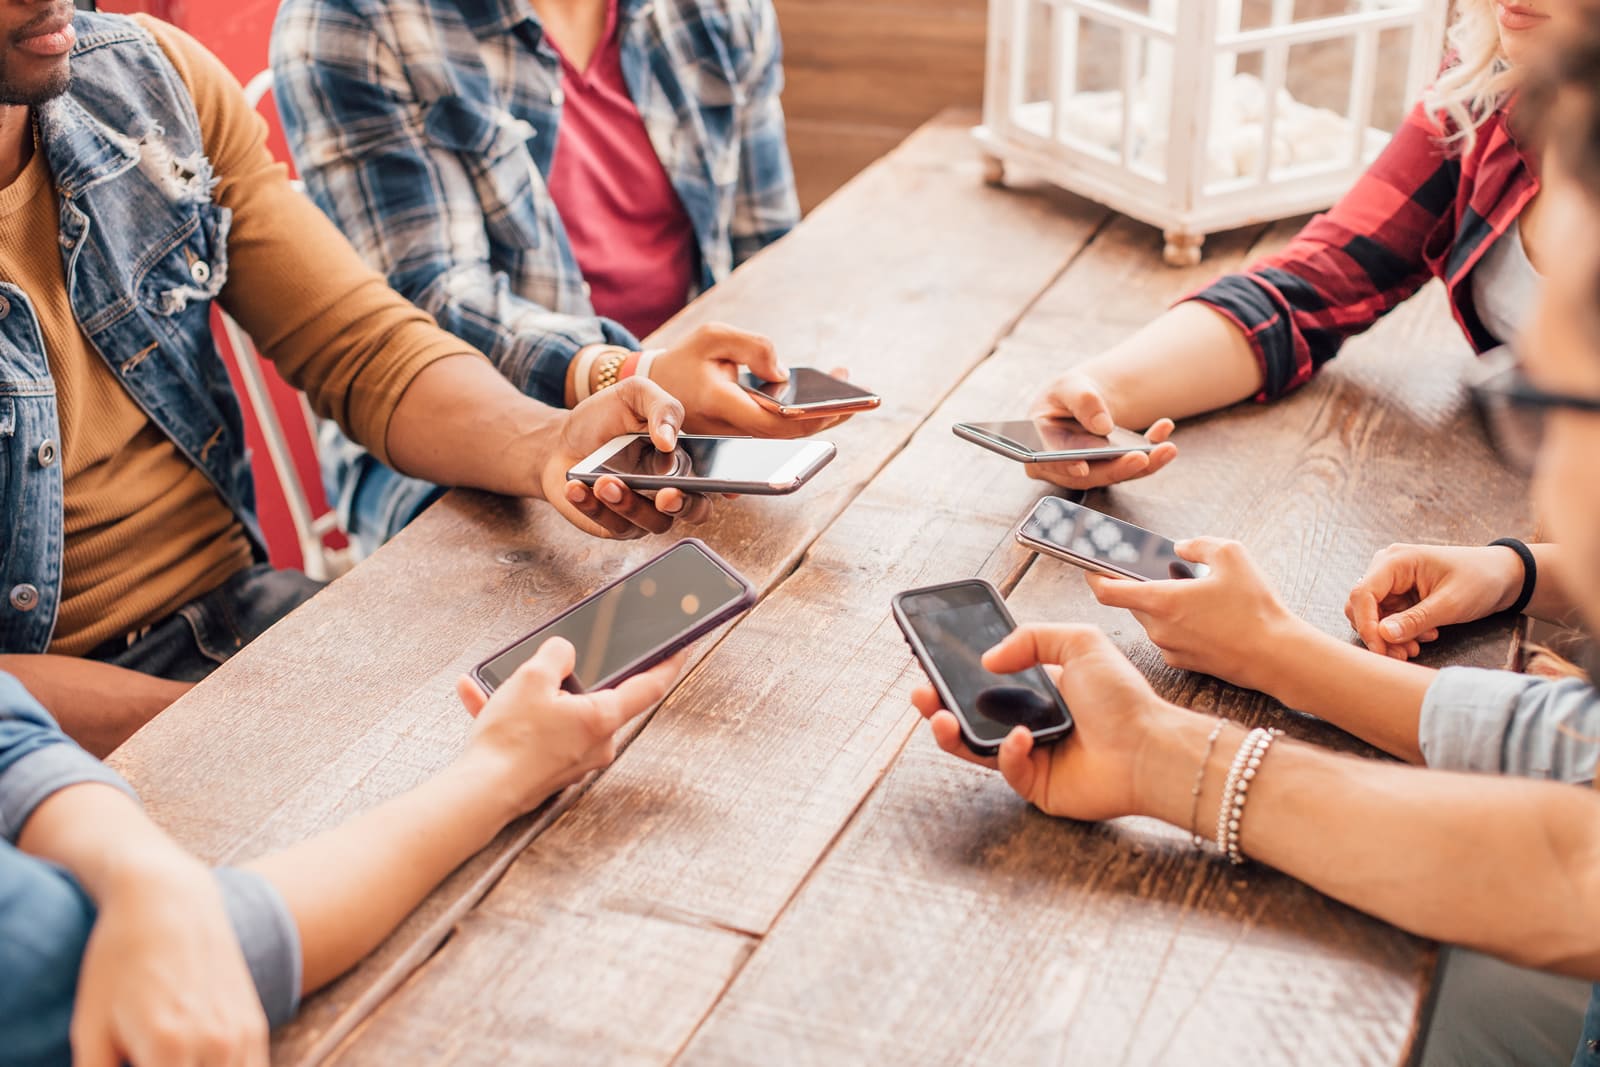 Group of young friends participating in an online bulletin board on their smartphones while sitting at a wooden table